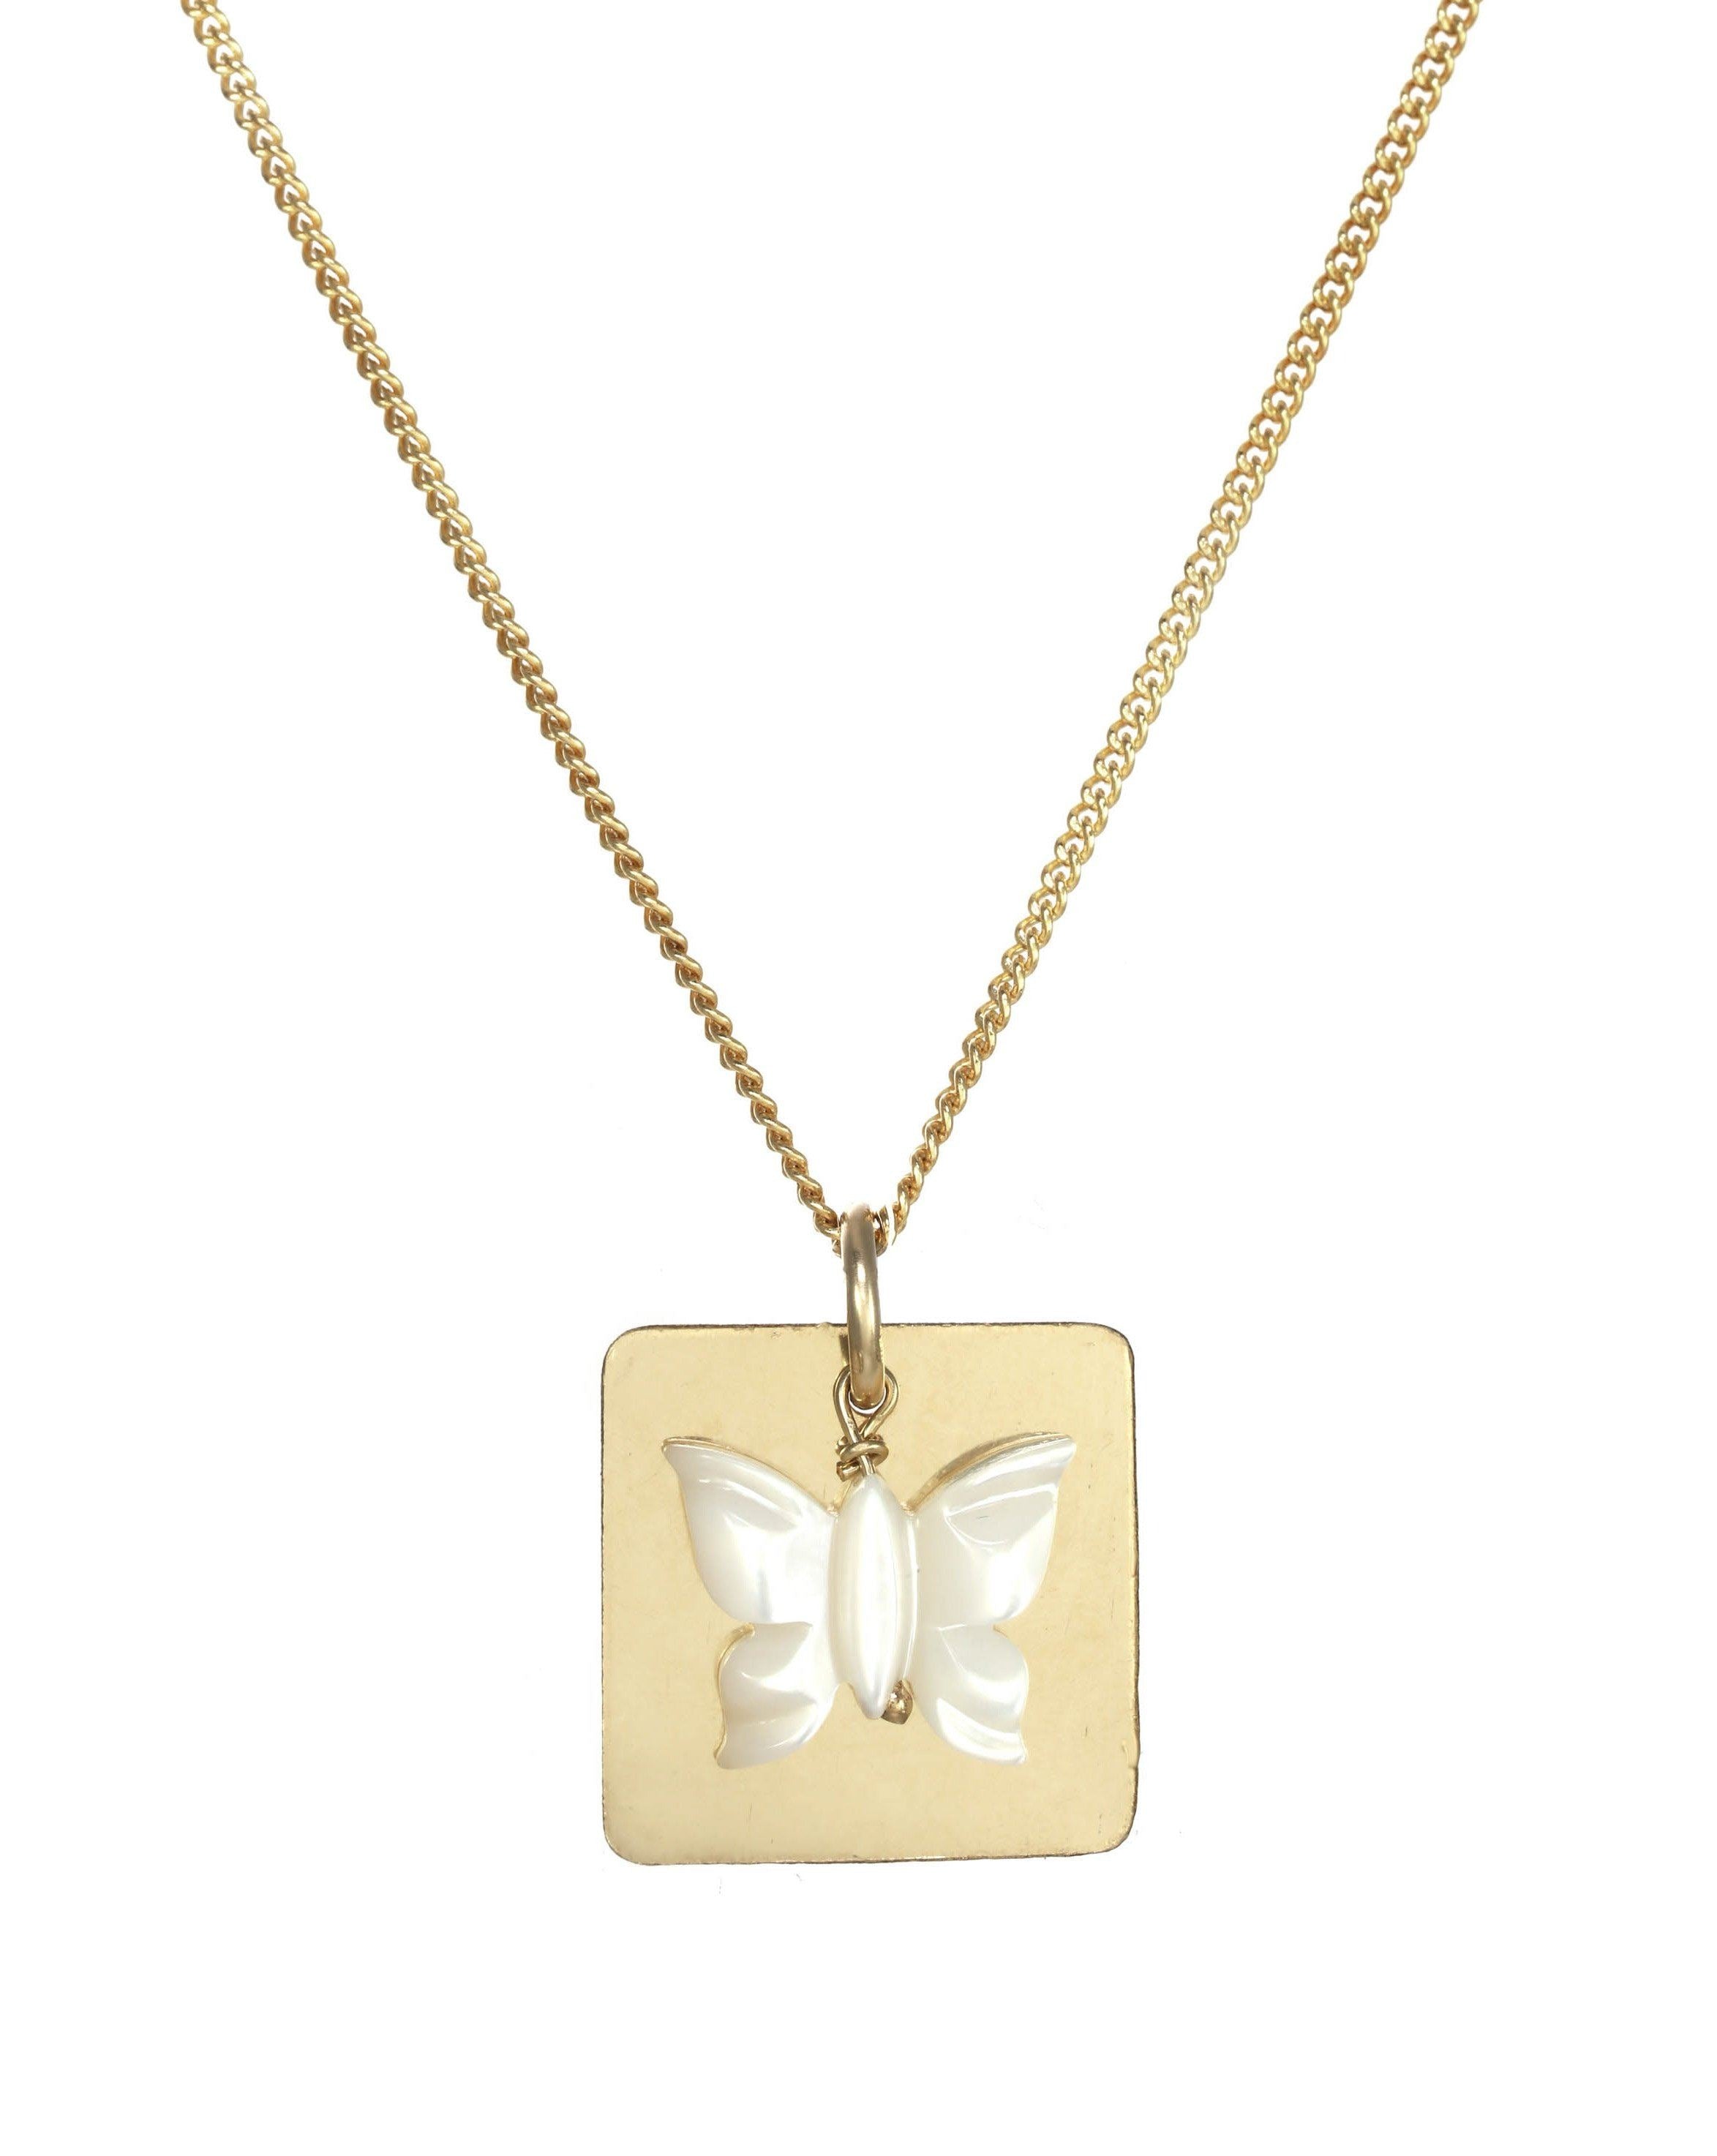 Esperanza Necklace by KOZAKH. An 18 to 20 inch adjustable length necklace in 14K Gold Filled, featuring a Mother of pearl butterfly charm and a 16mm Square pendant.